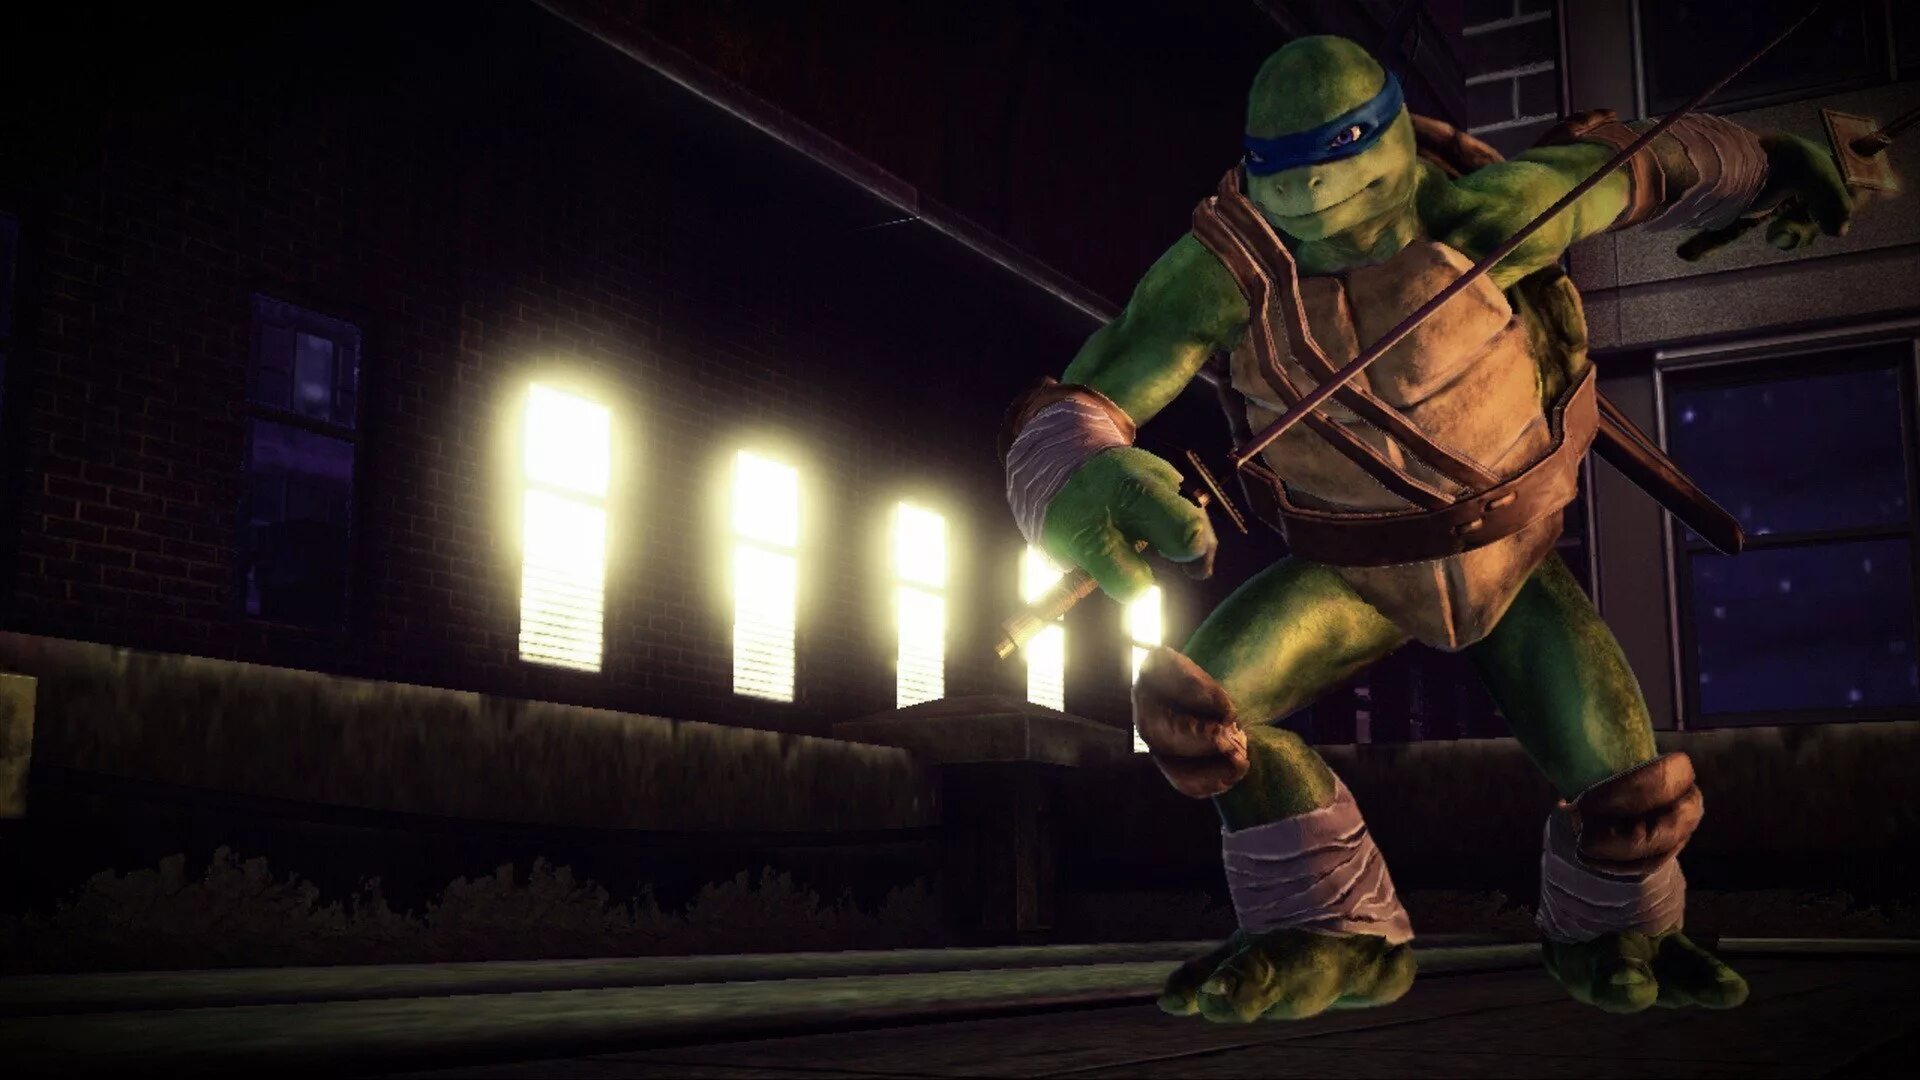 Turtles 2013. TMNT 2002. TMNT out of the Shadows игра. Teenage Mutant Ninja Turtles: out of the Shadows (2013). Teenage Mutant Ninja Turtles (игра, 2013).